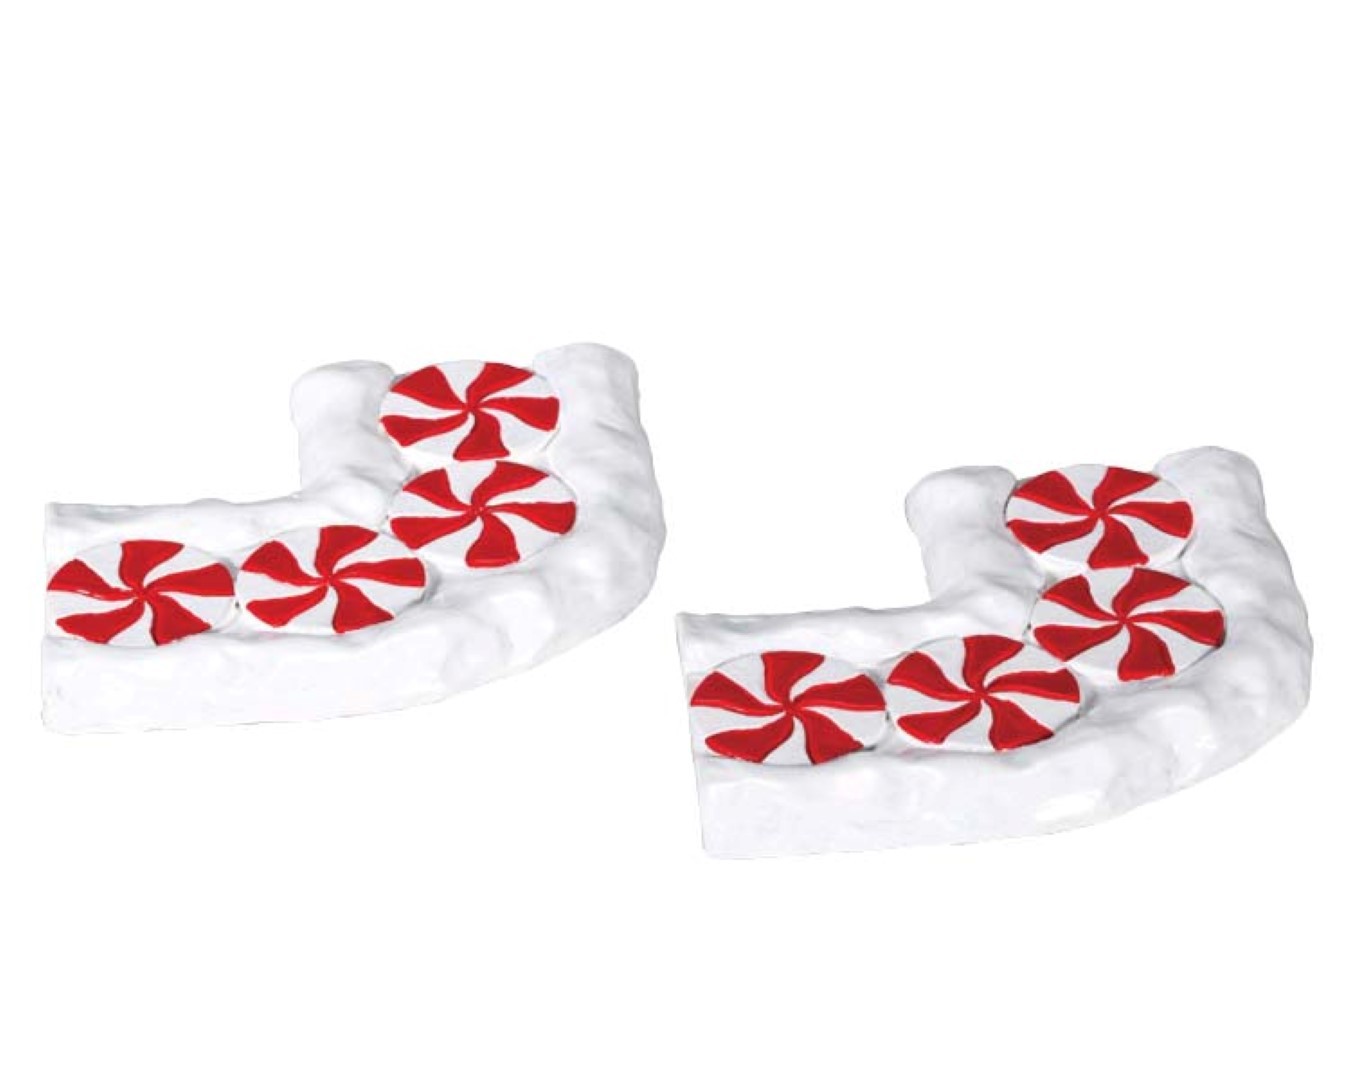 Candy cane lane curved set of 2 - 